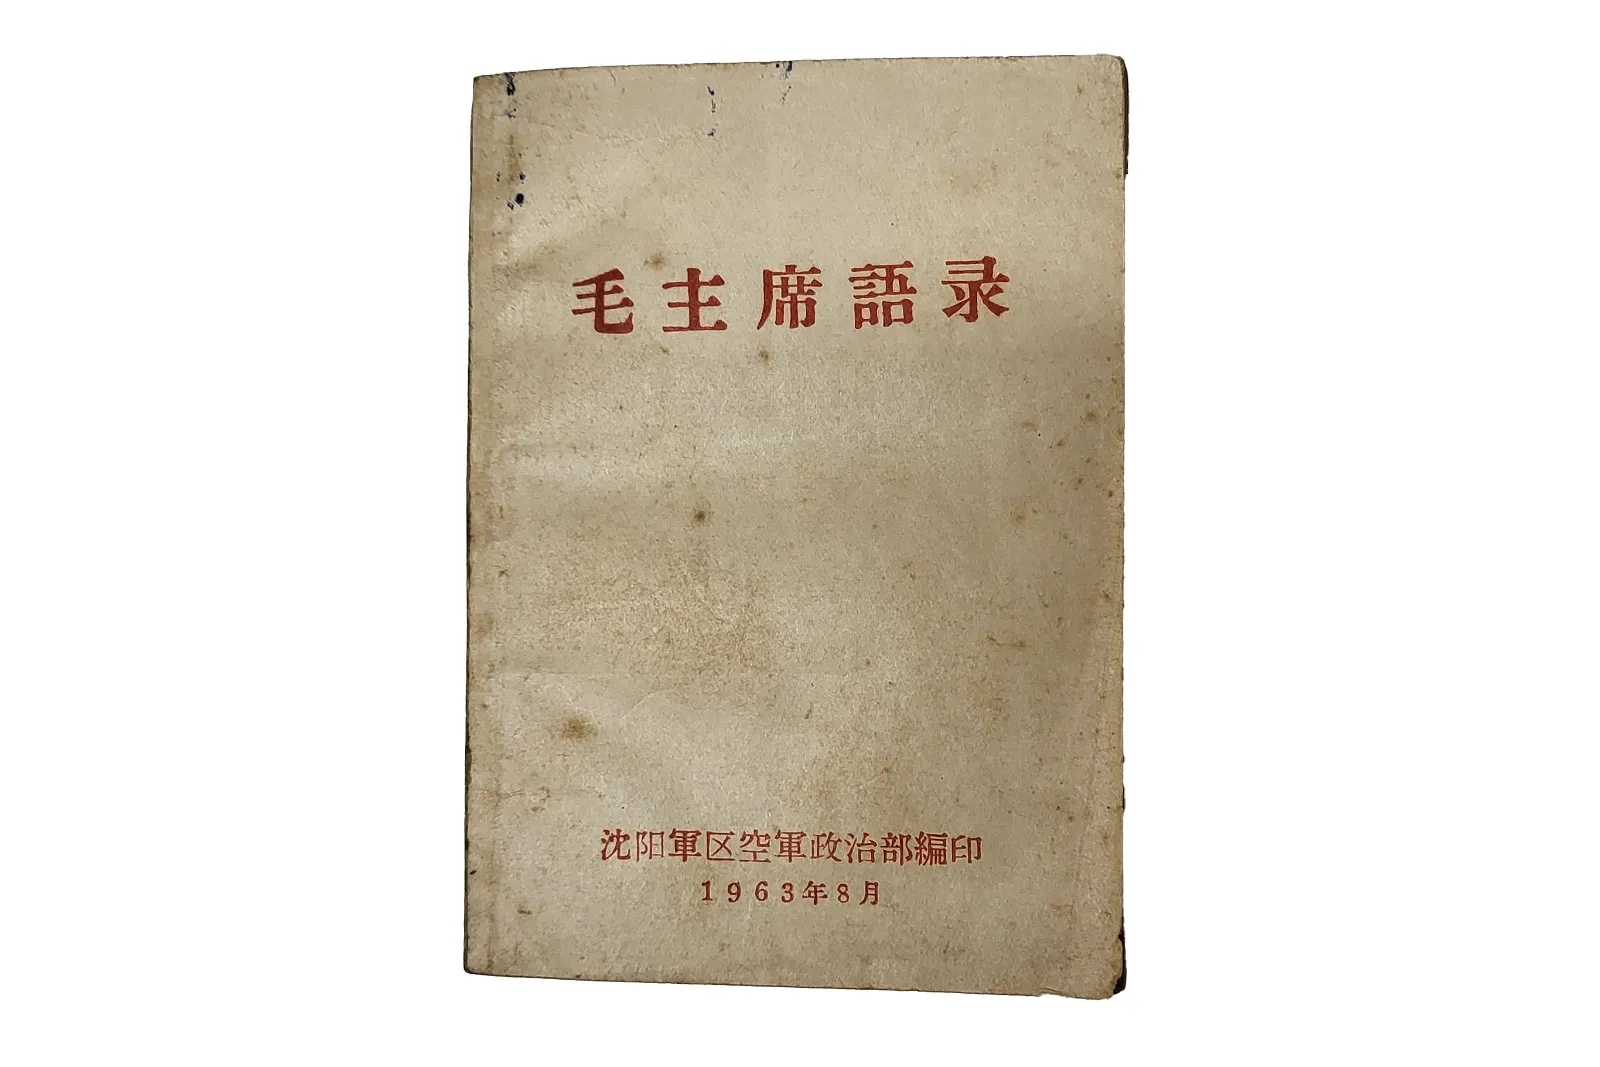 Rare prototype edition of Mao&#8217;s &#8216;Little Red Book&#8217; heads to Chiswick Feb. 29